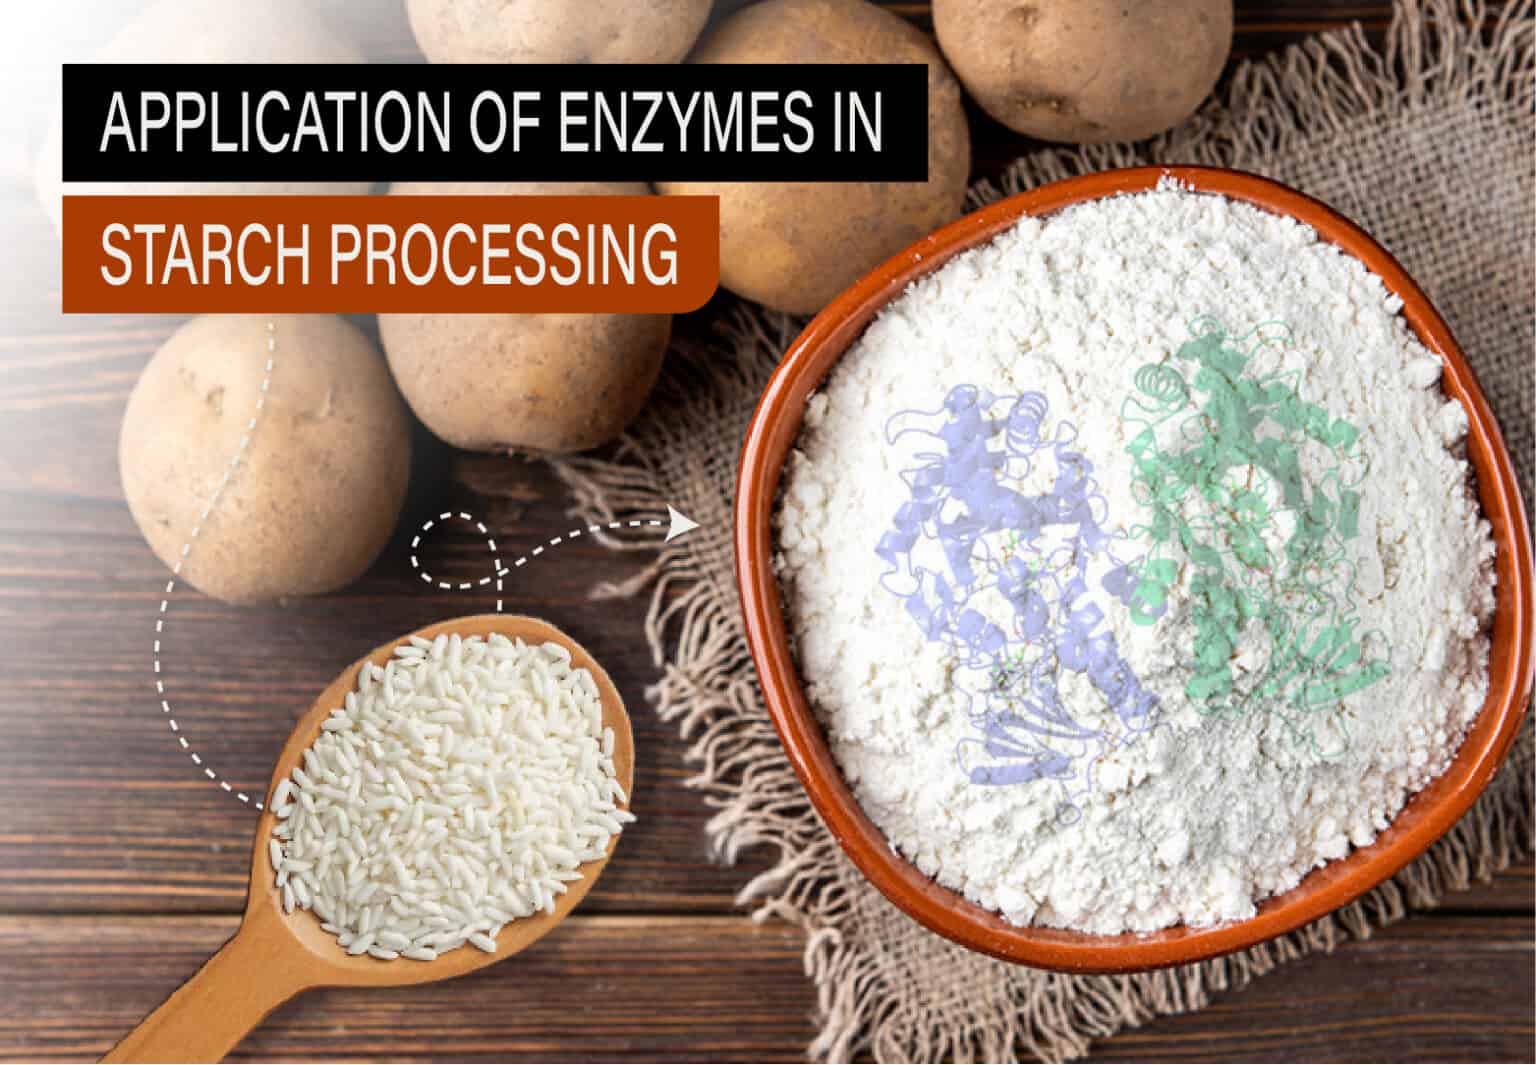 Application of Enzymes in Starch Processing